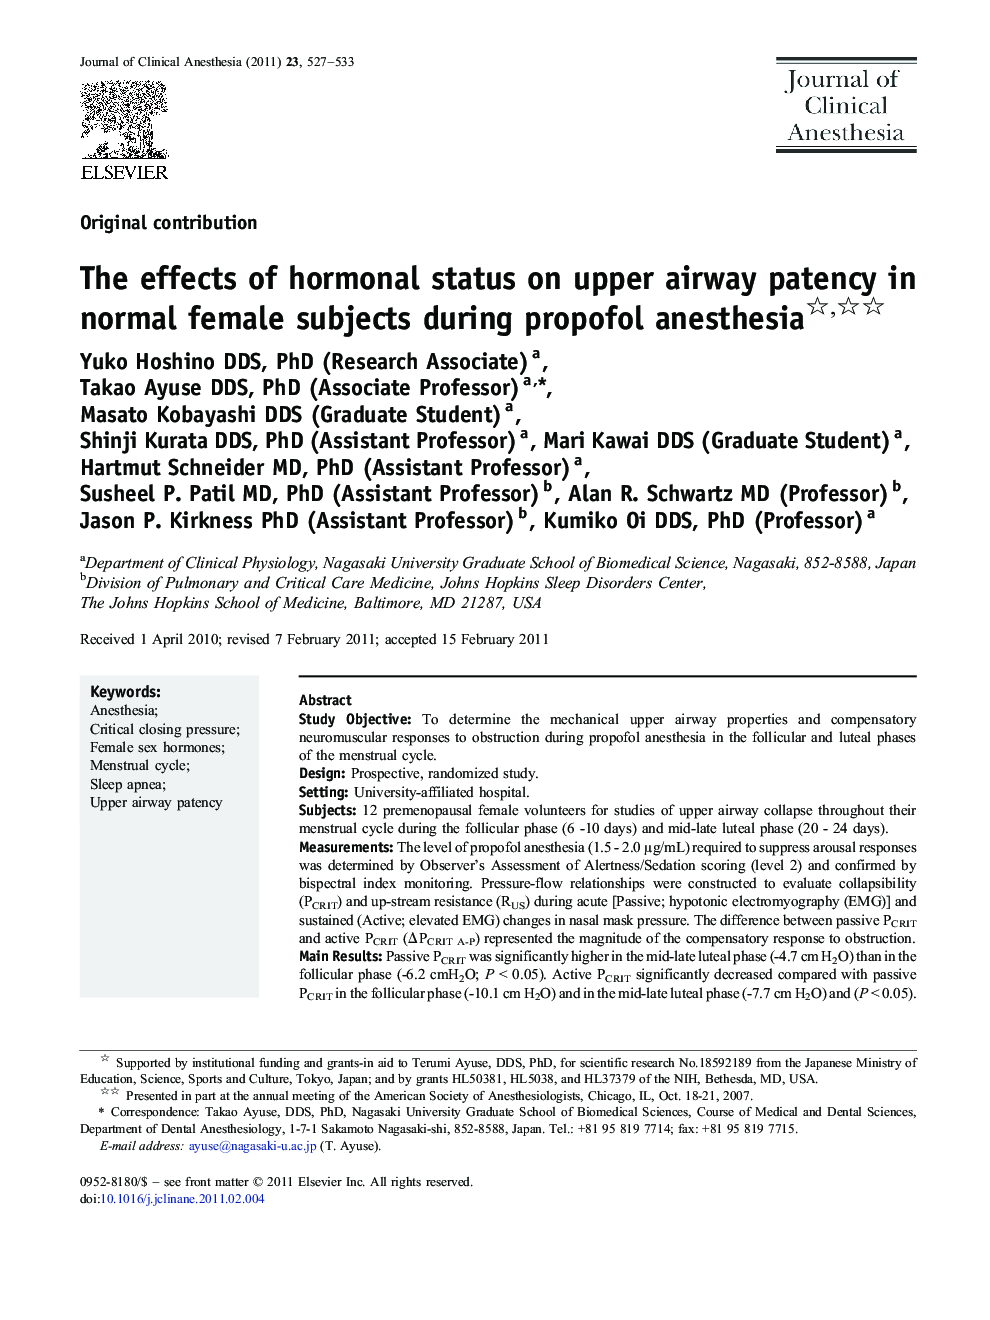 The effects of hormonal status on upper airway patency in normal female subjects during propofol anesthesia 